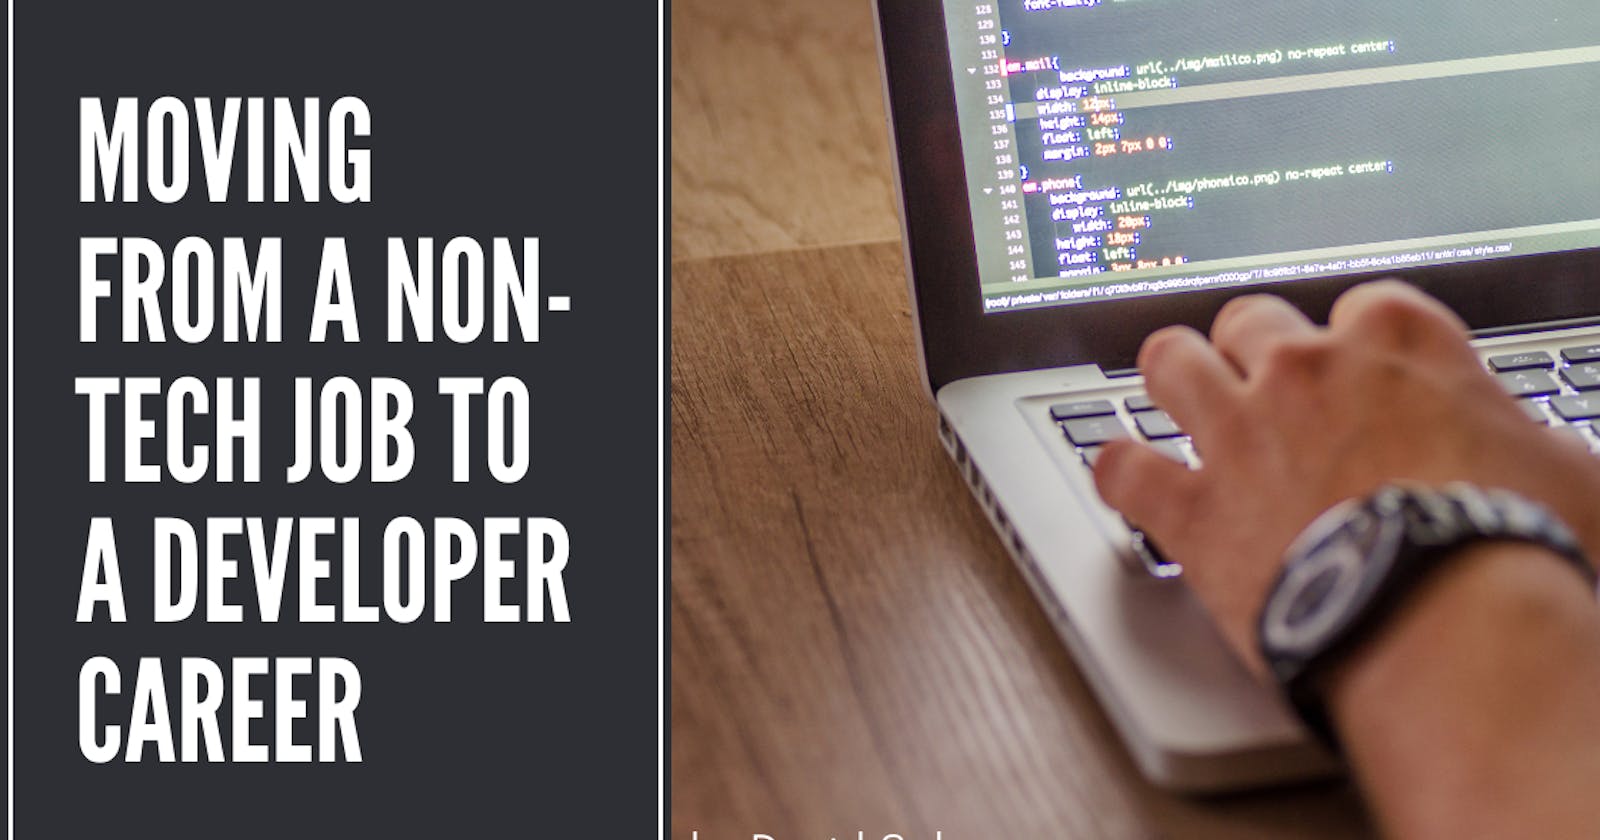 It's time to upgrade: Moving from a non-tech job to a developer career